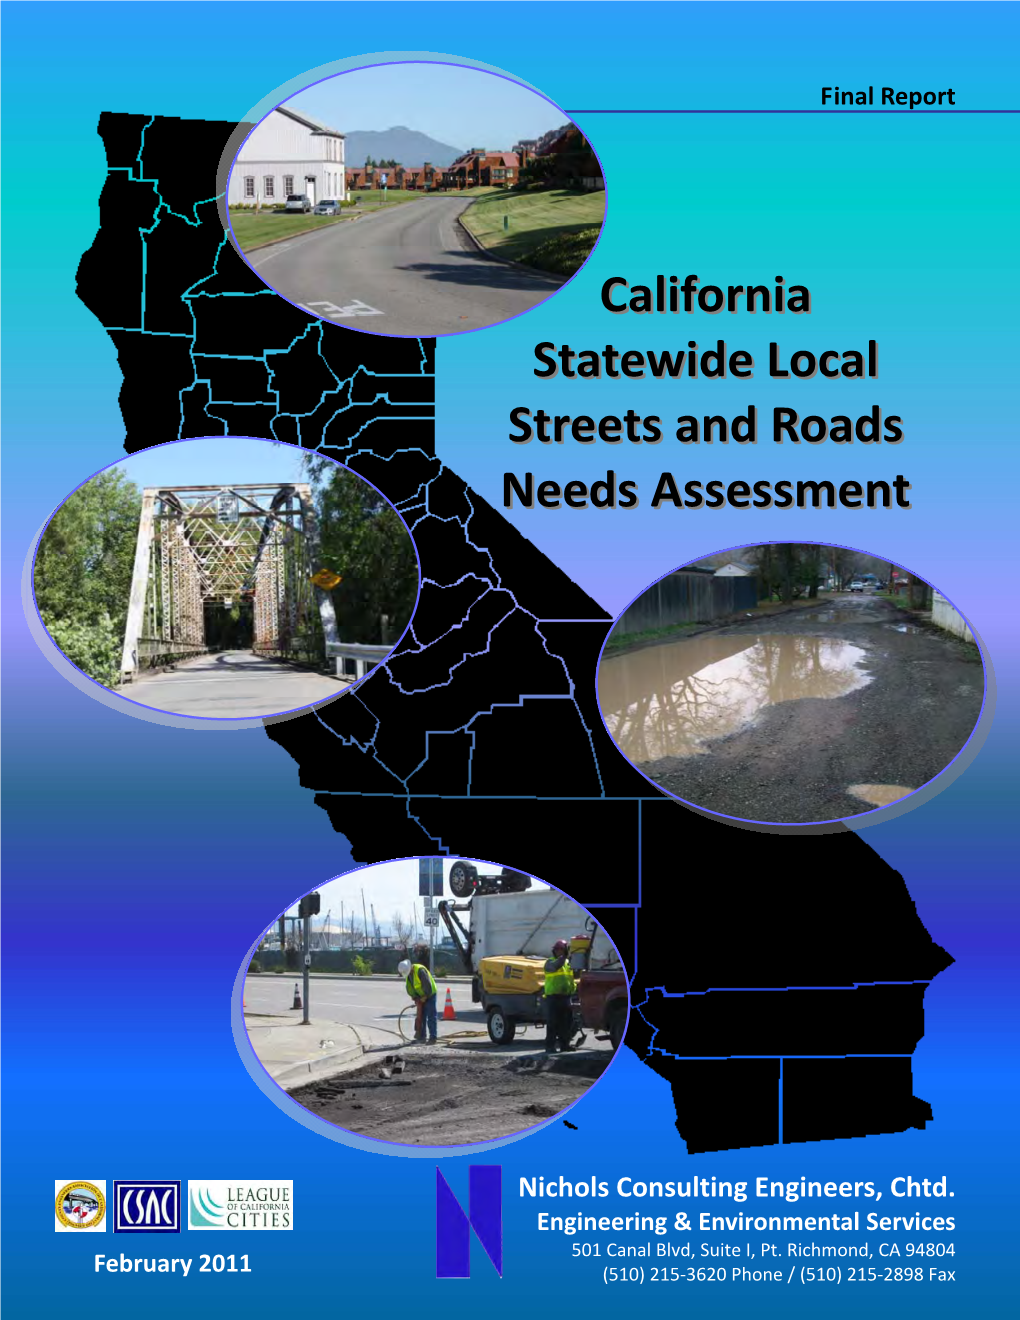 California Statewide Local Streets and Roads Needs Assessment